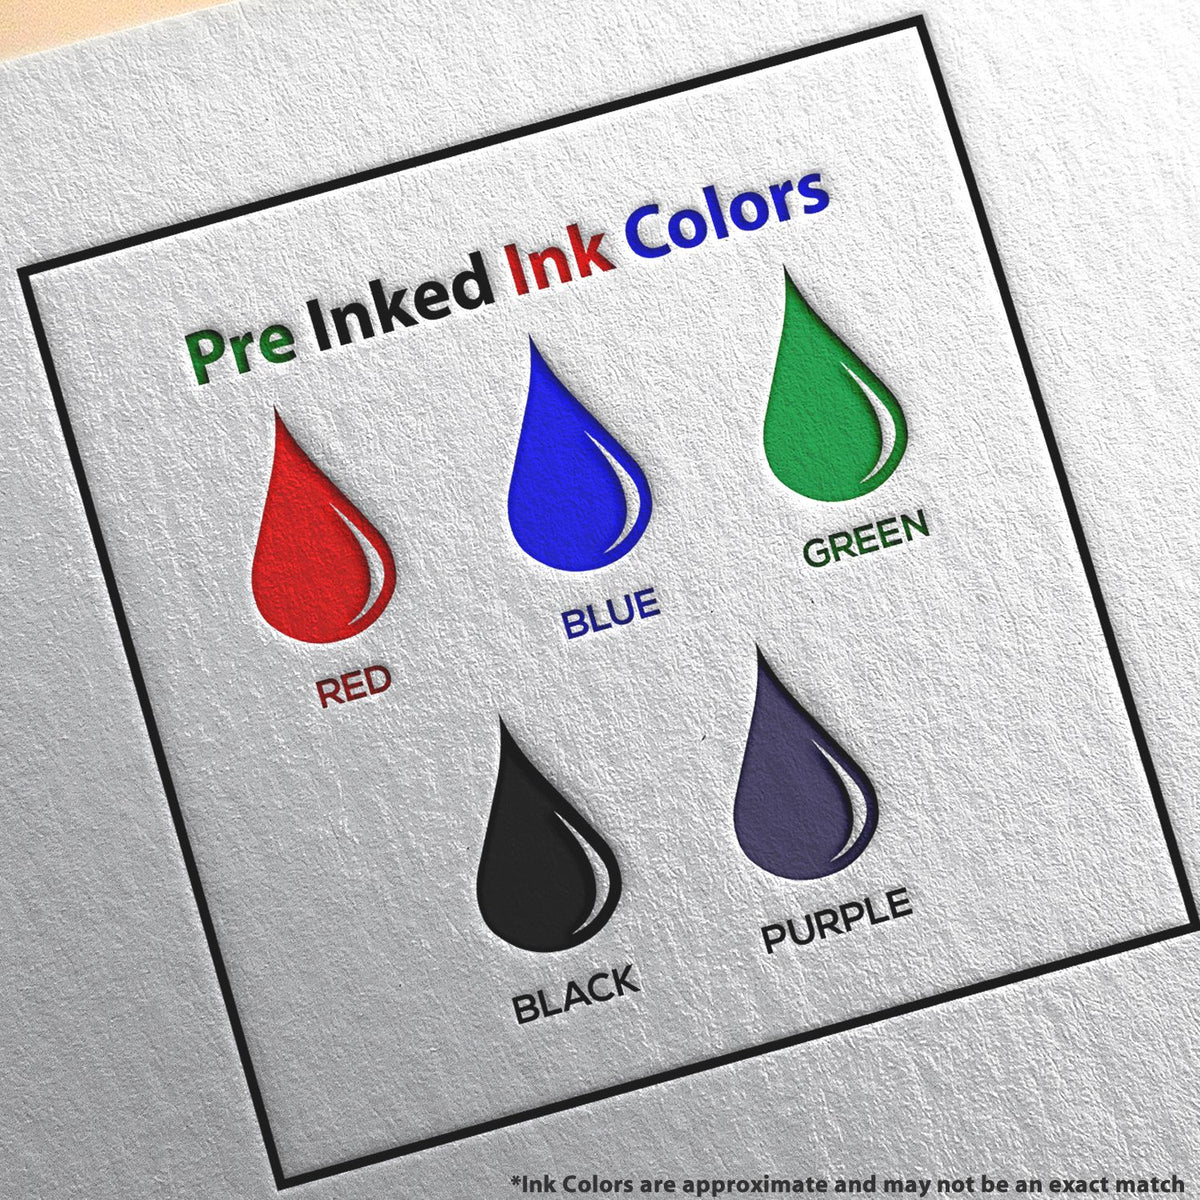 A picture showing the different ink colors or hues available for the Slim Pre-Inked Kentucky Professional Engineer Seal Stamp product.